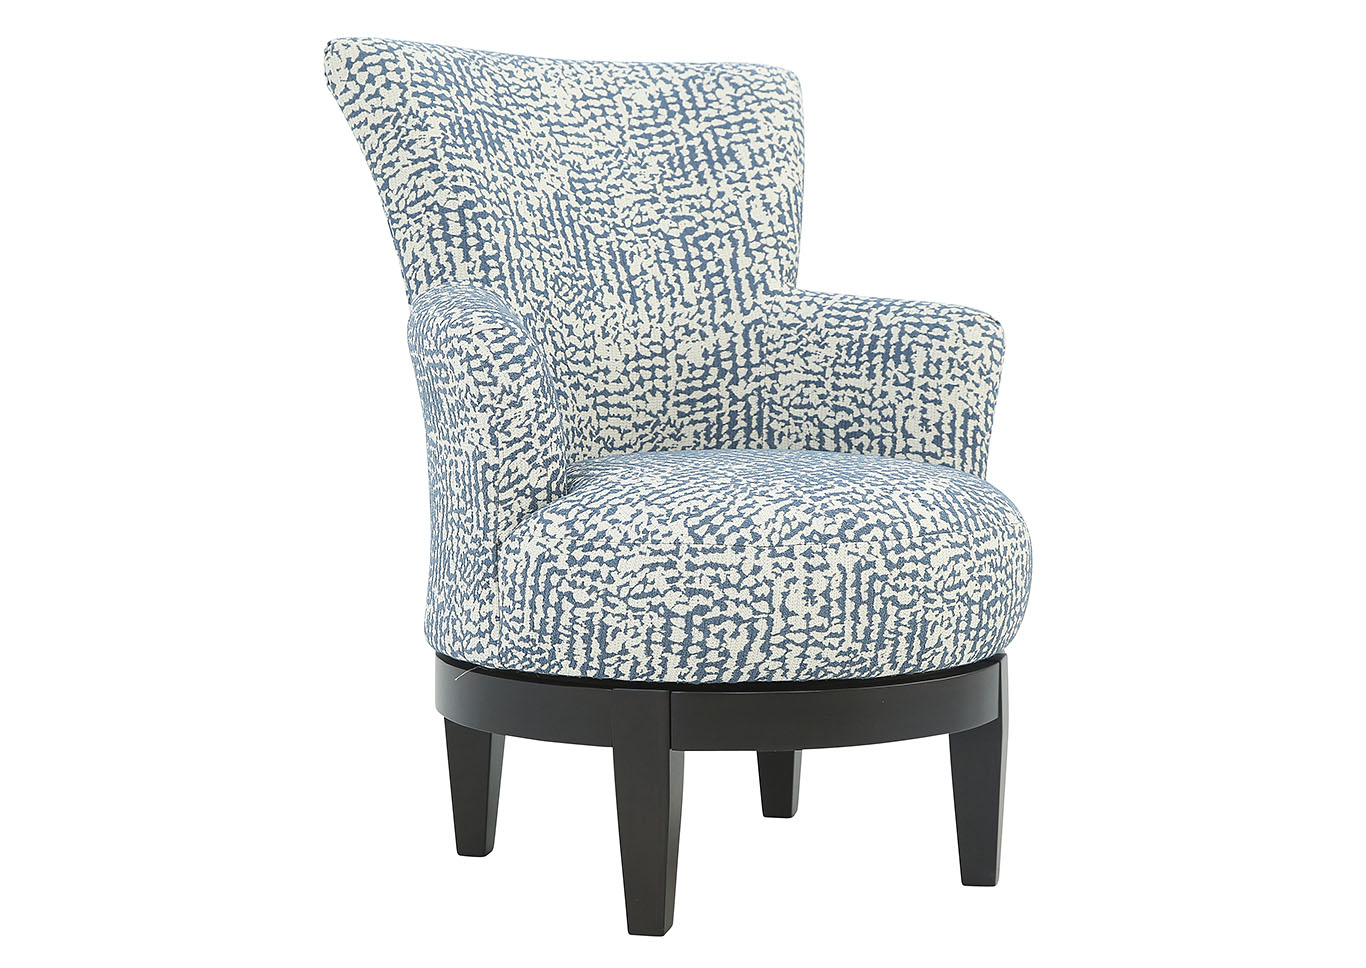 Justine Swivel Chair - Traditional Swivel Chair I Home Envy